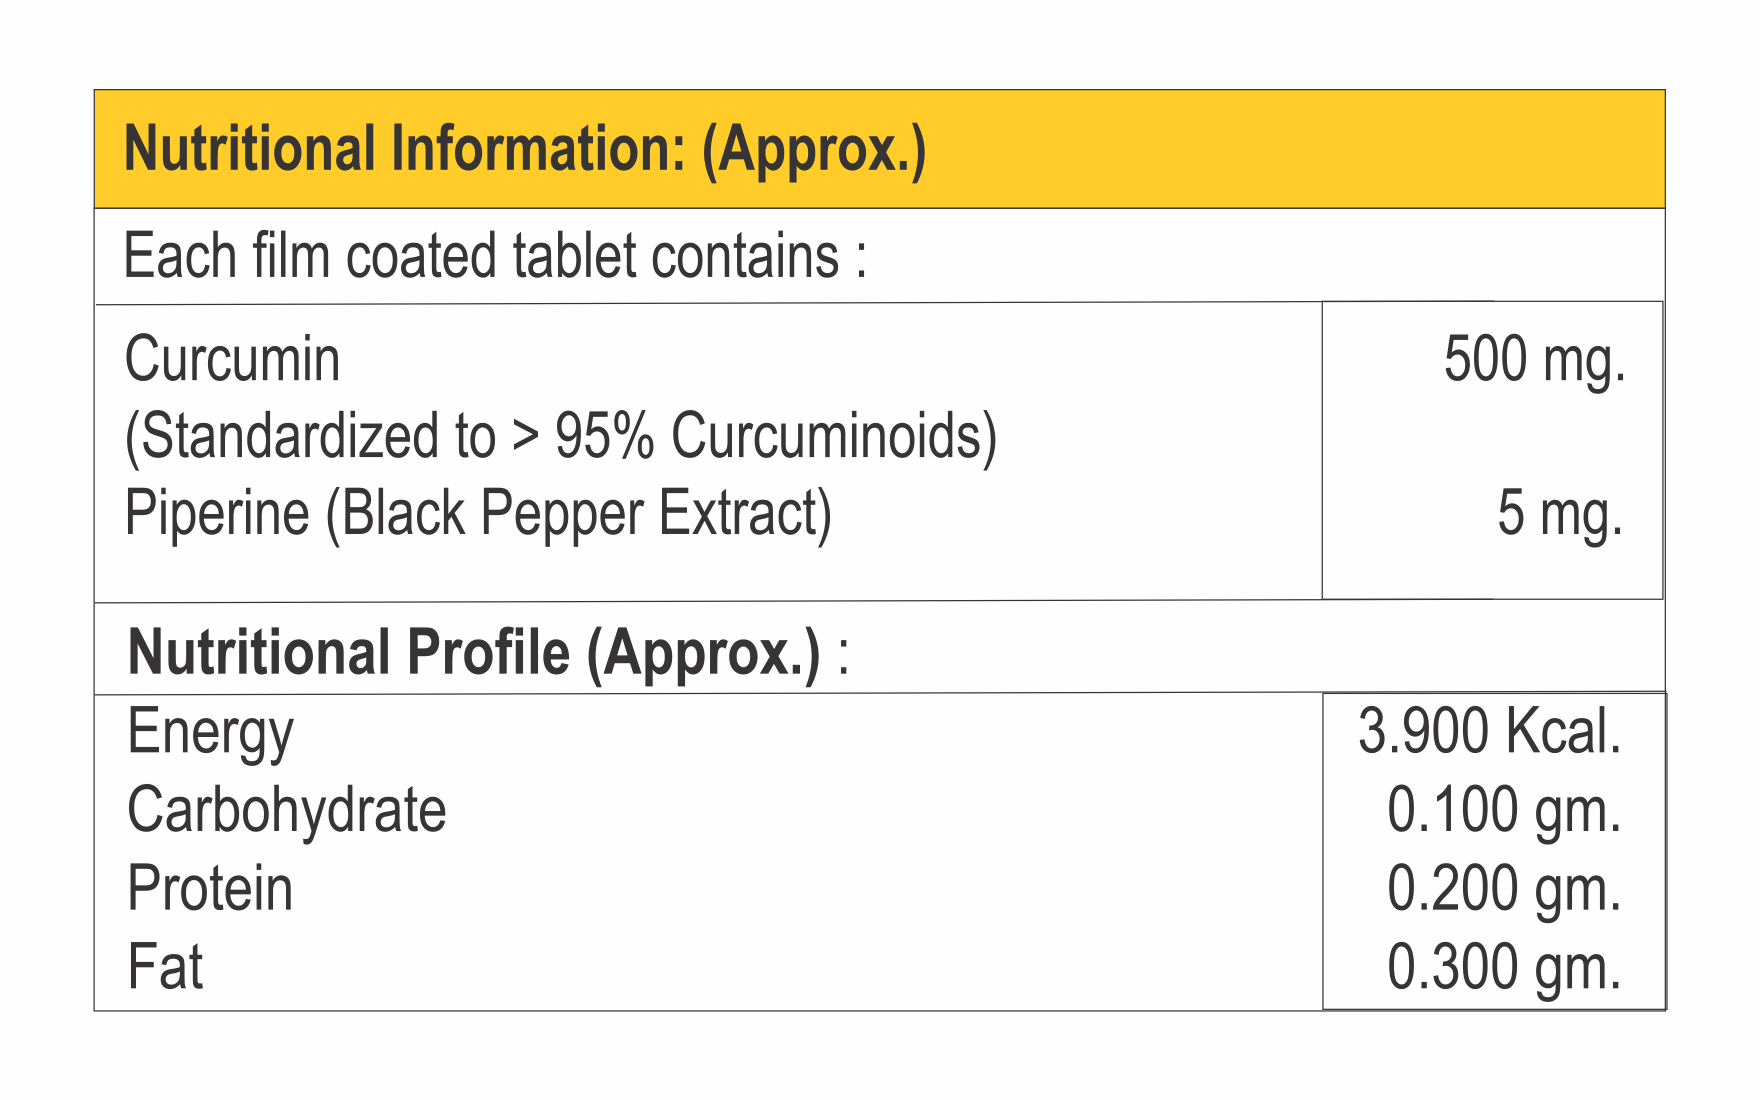 Curcumin and Piperine tablet